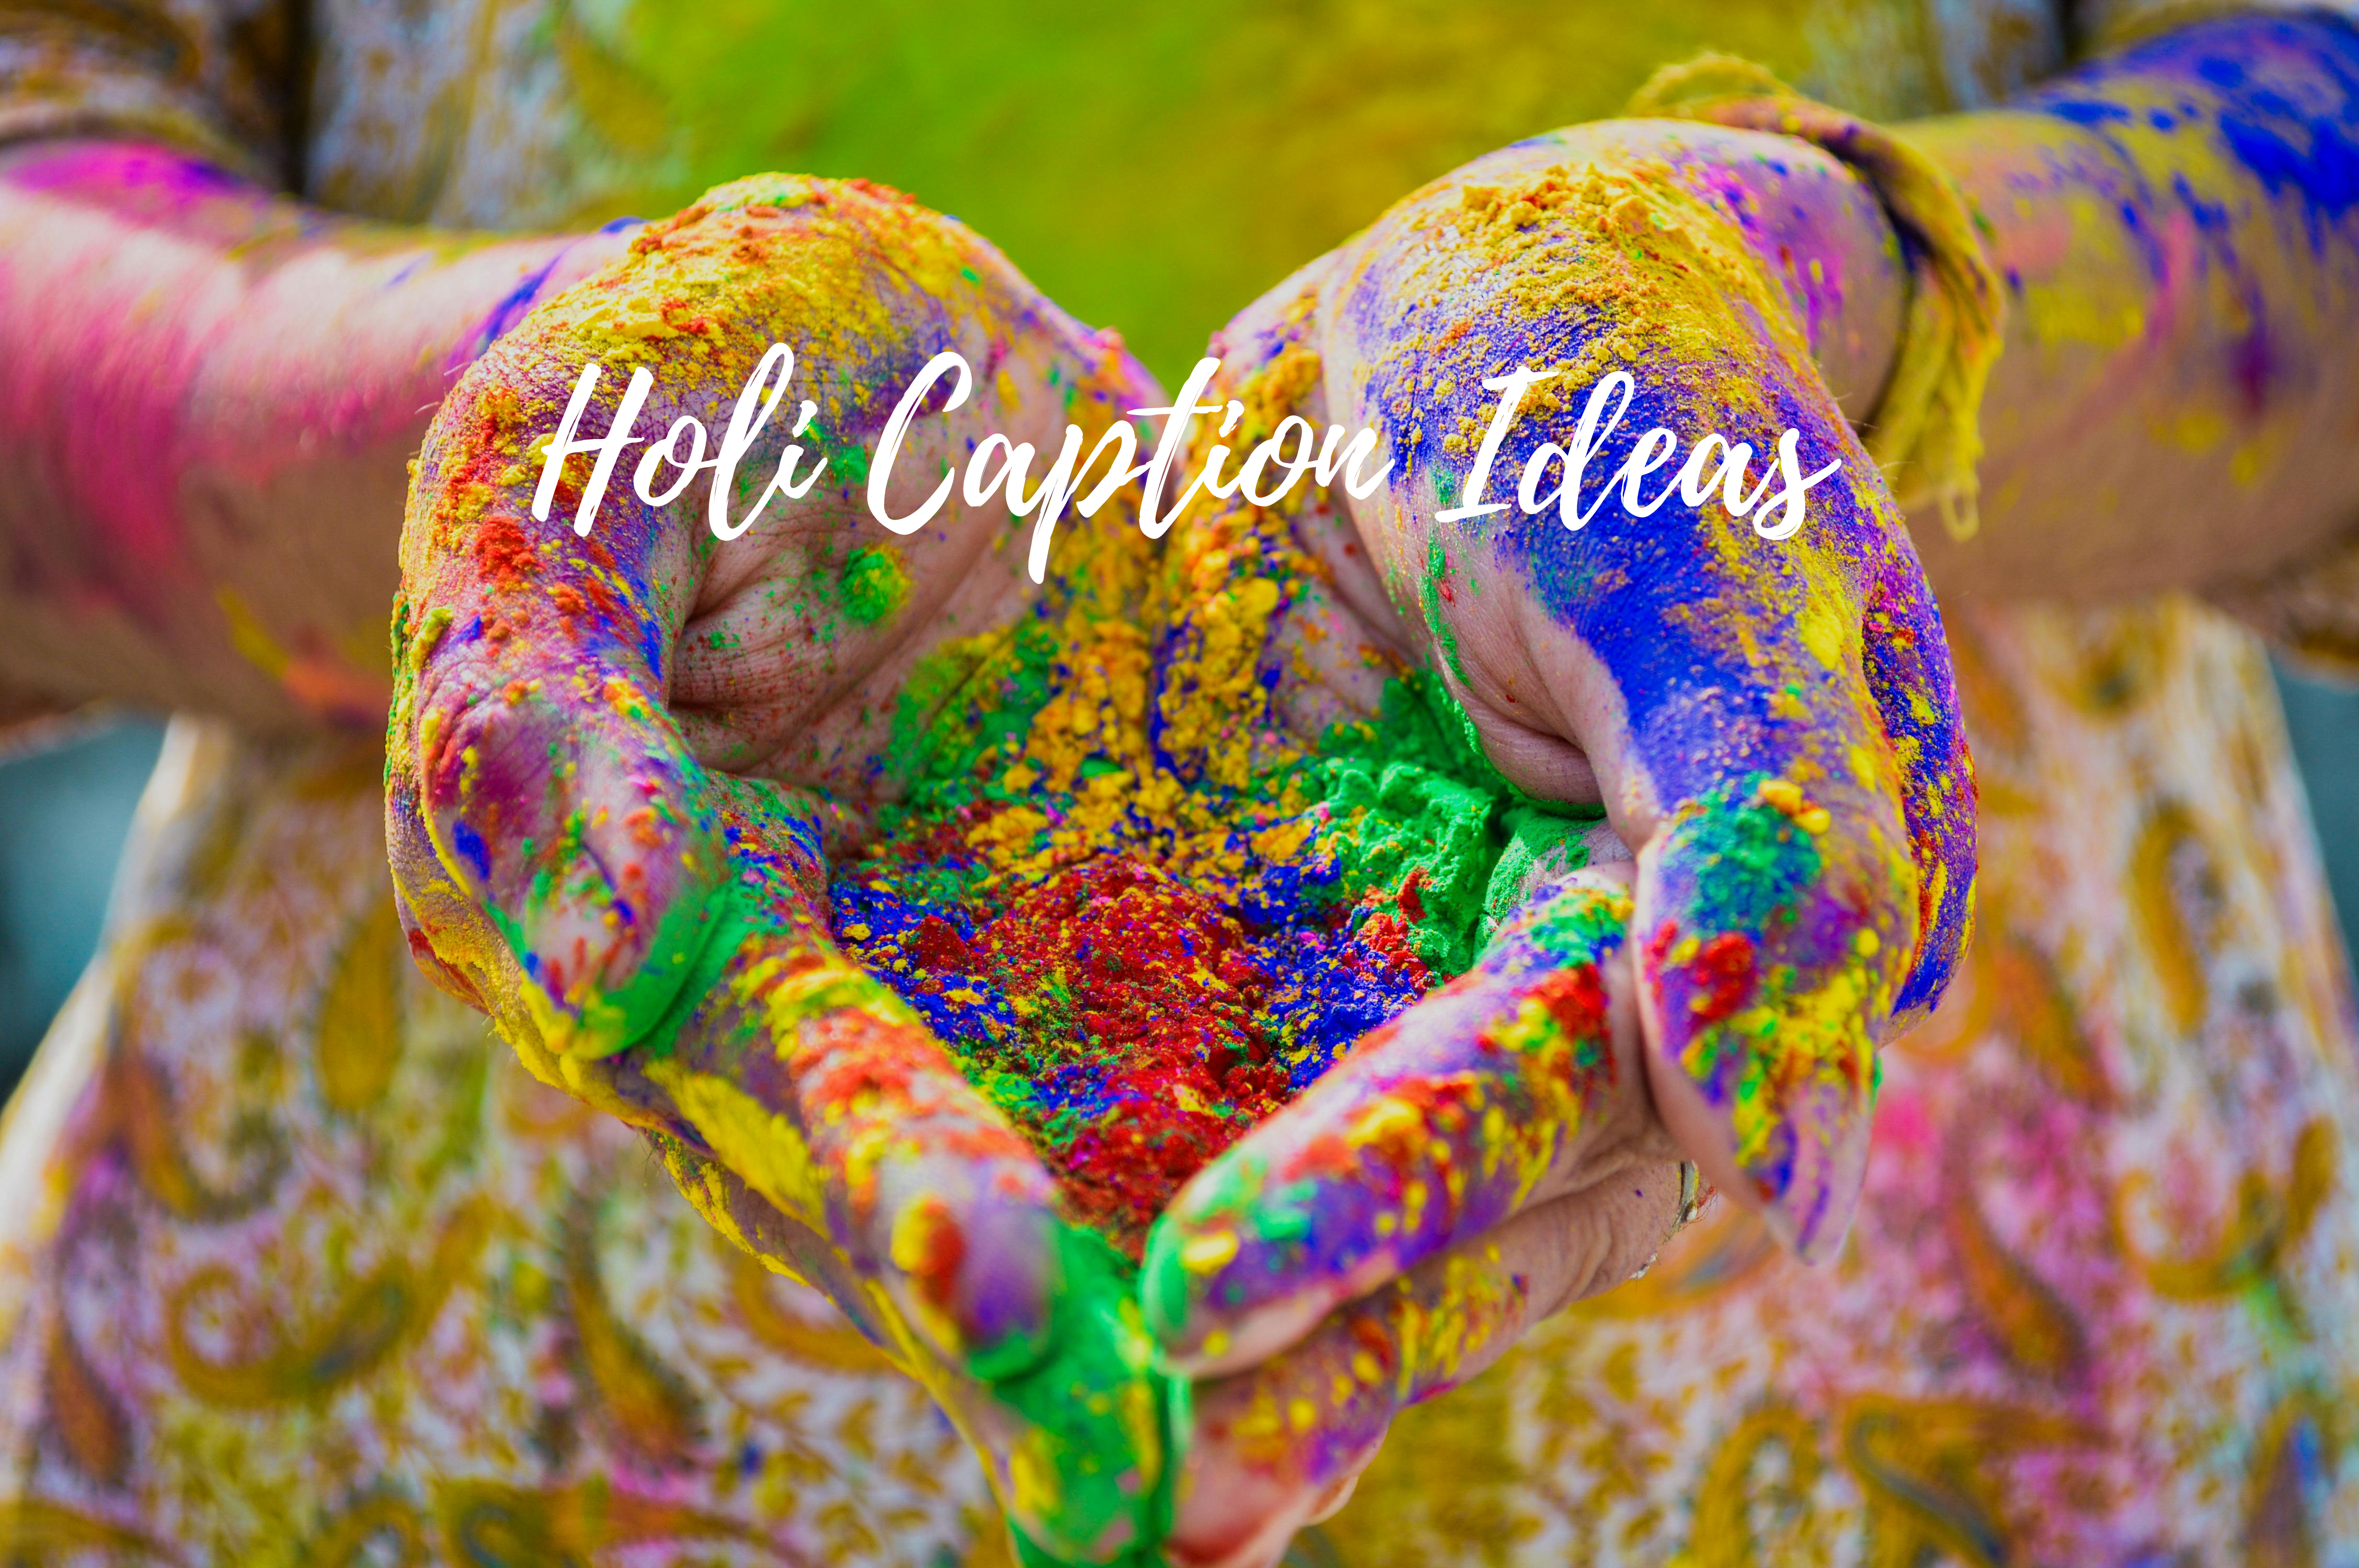 Colorful Holi Captions to Brighten Your Feed